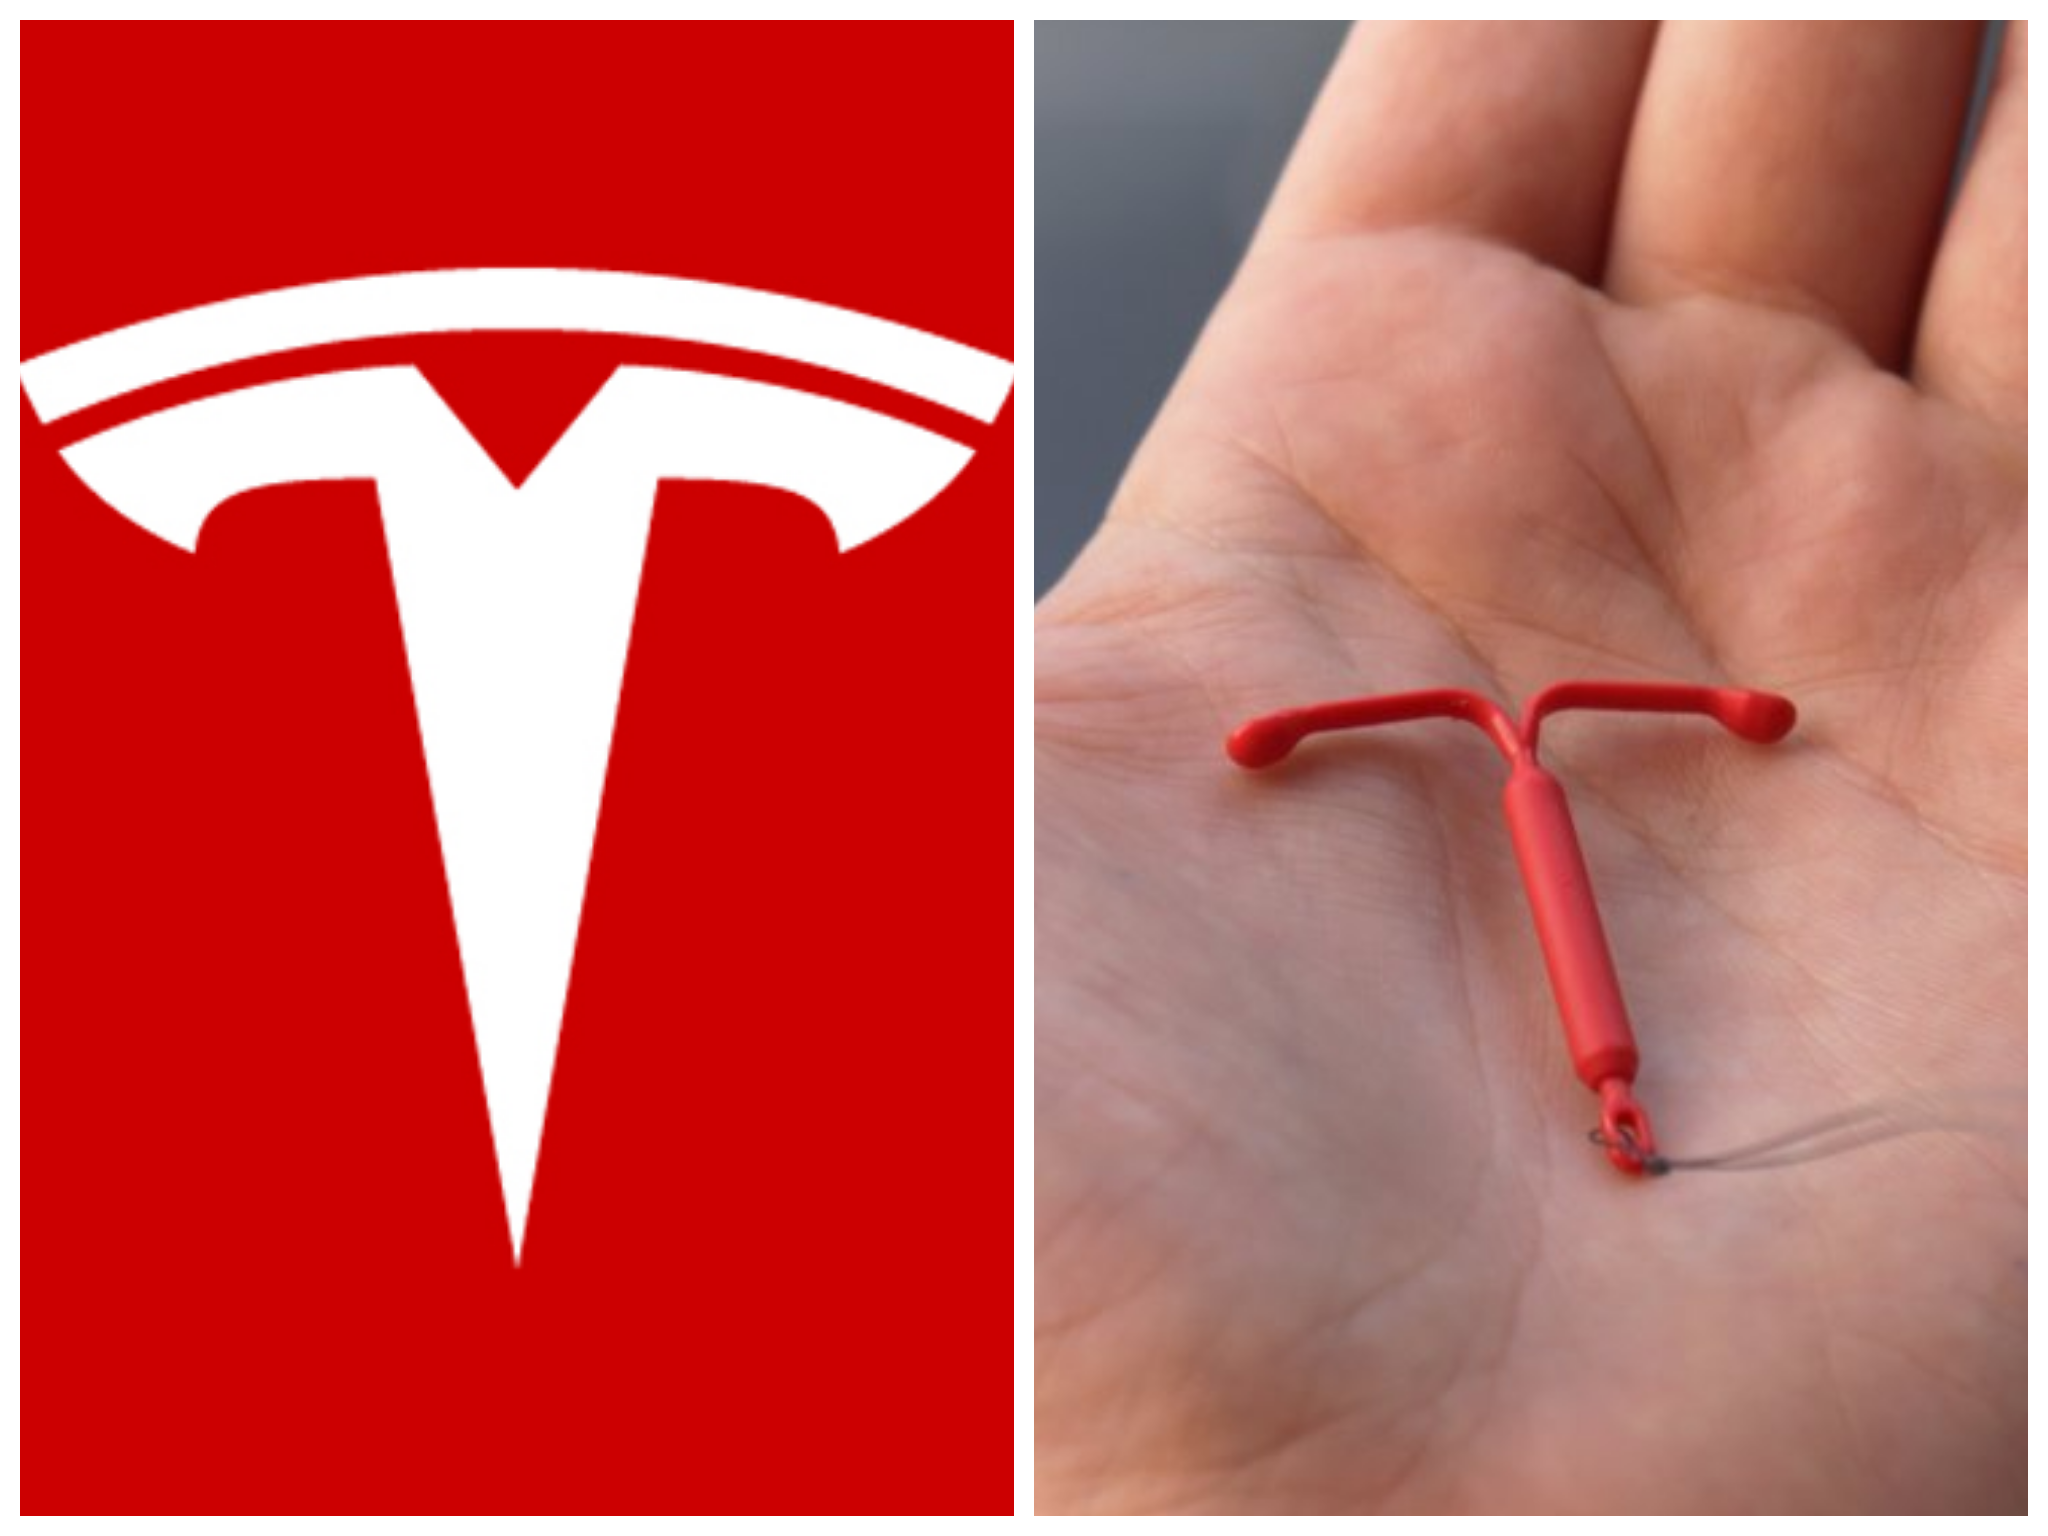 Ya'll comparing the Tesla logo to a cat's nose and I'm over here like "bro..."